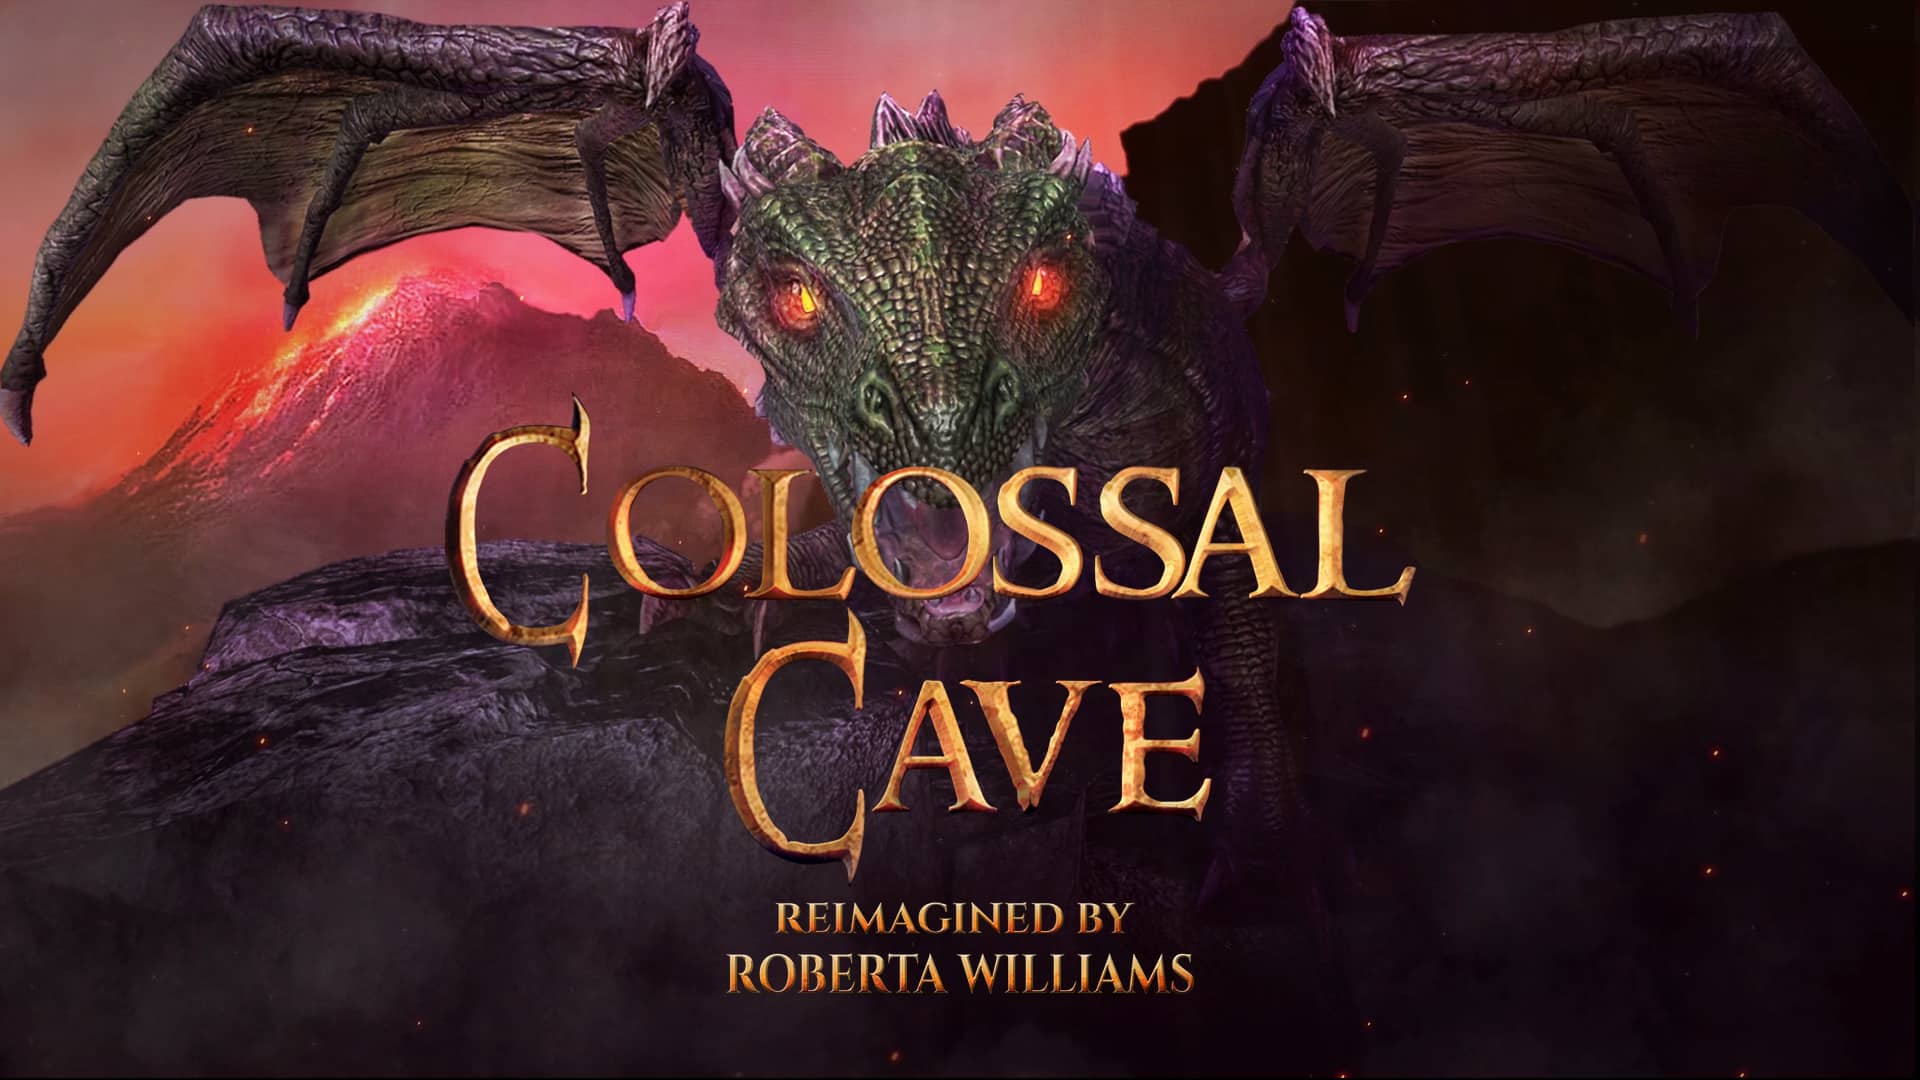 colossal cave adventure c